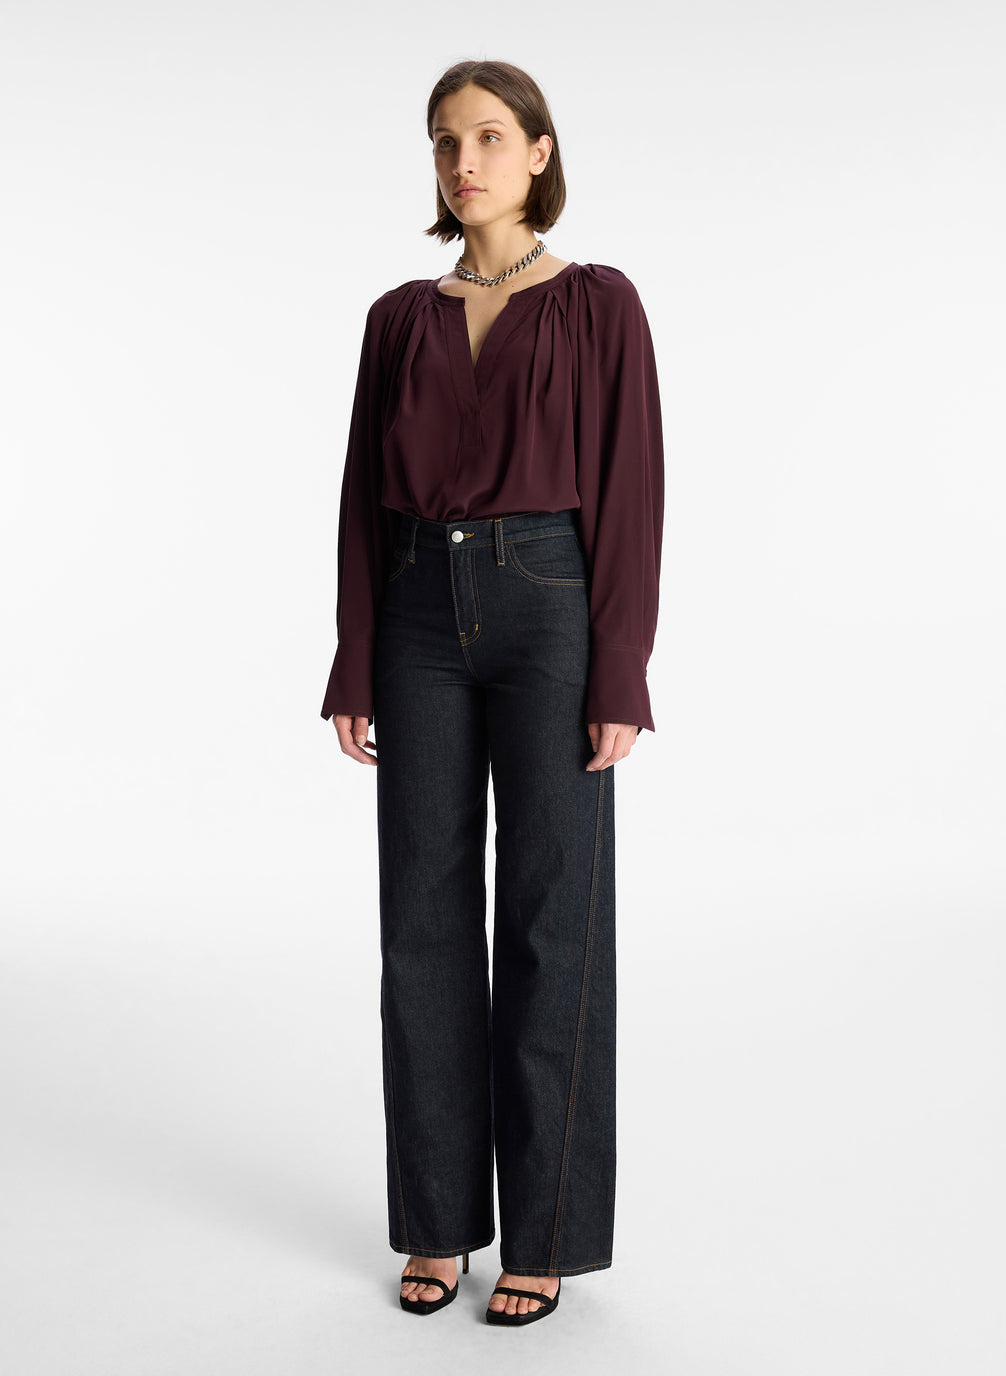 side view of woman wearing burgundy v neck long sleeve silk top and dark wash denim jeans